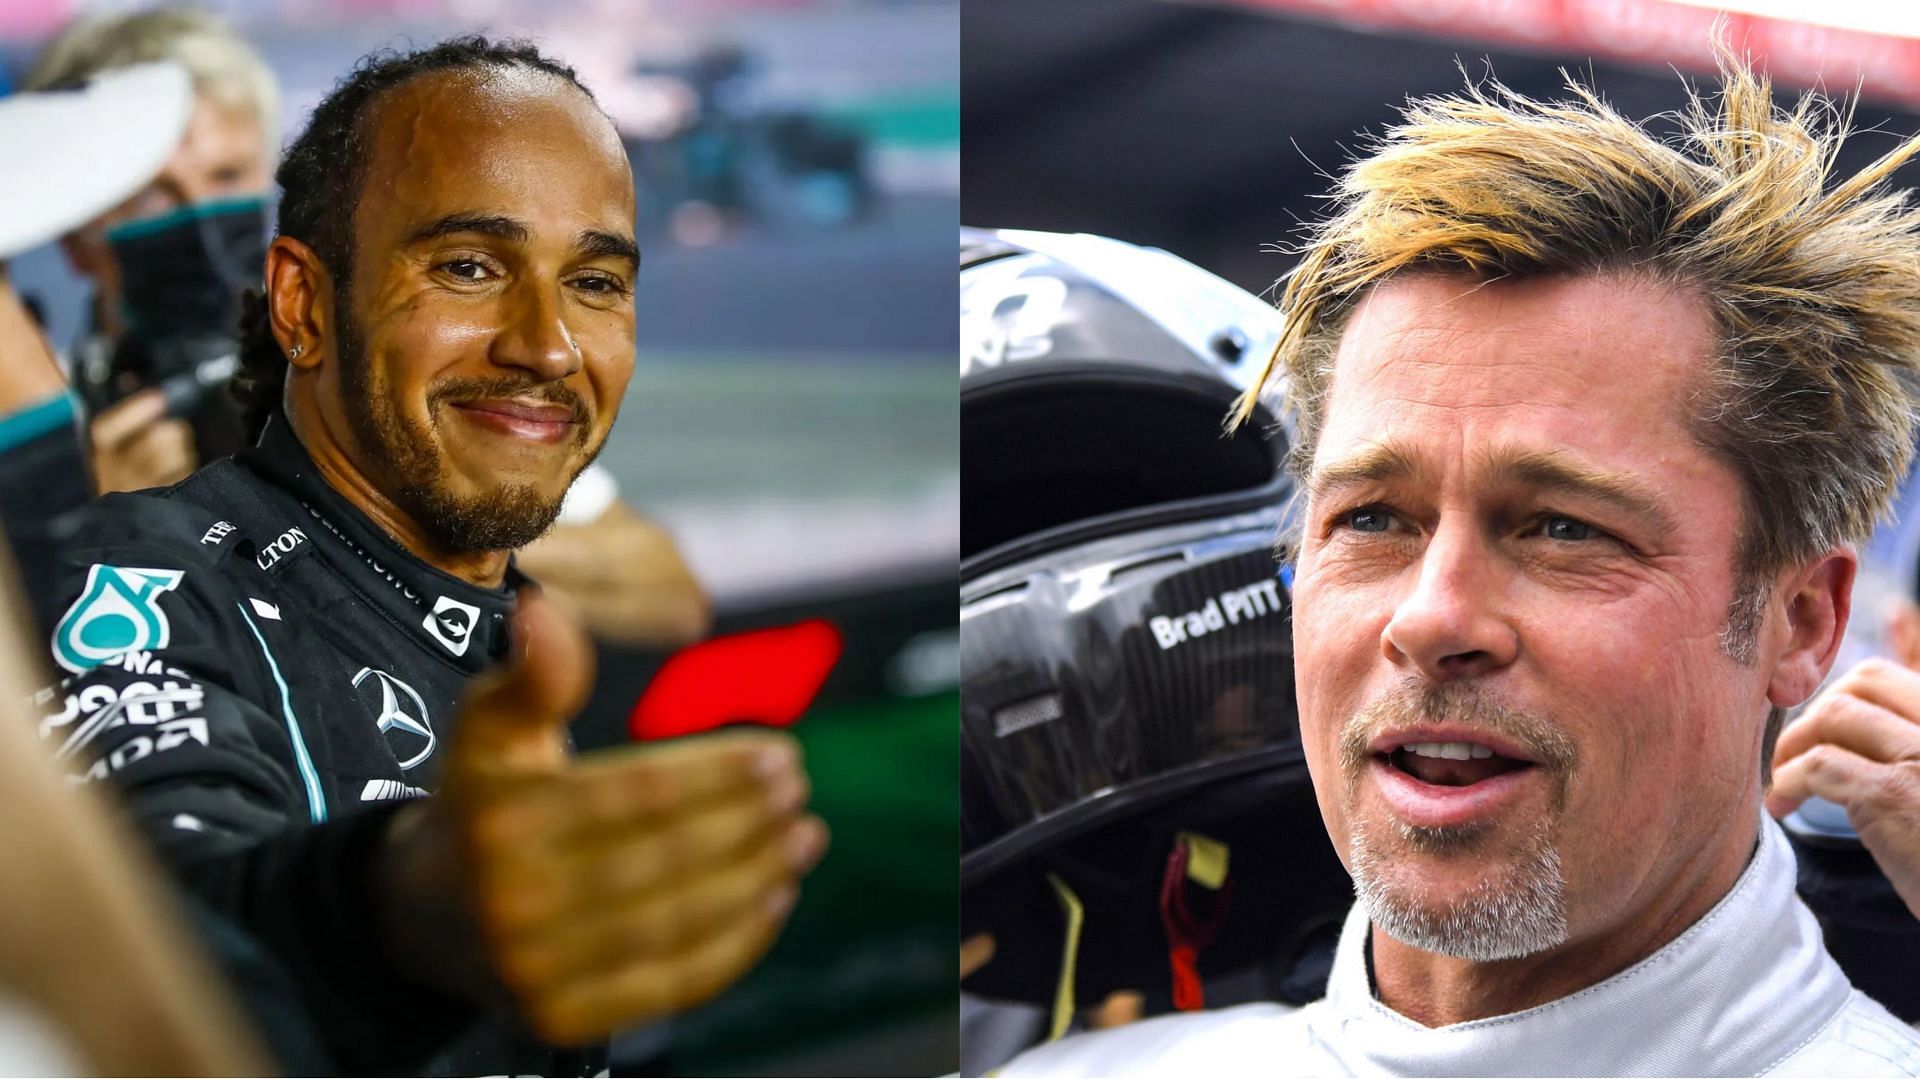 Lewis Hamilton reveals expected details about his F1 movie starring Brad Pitt